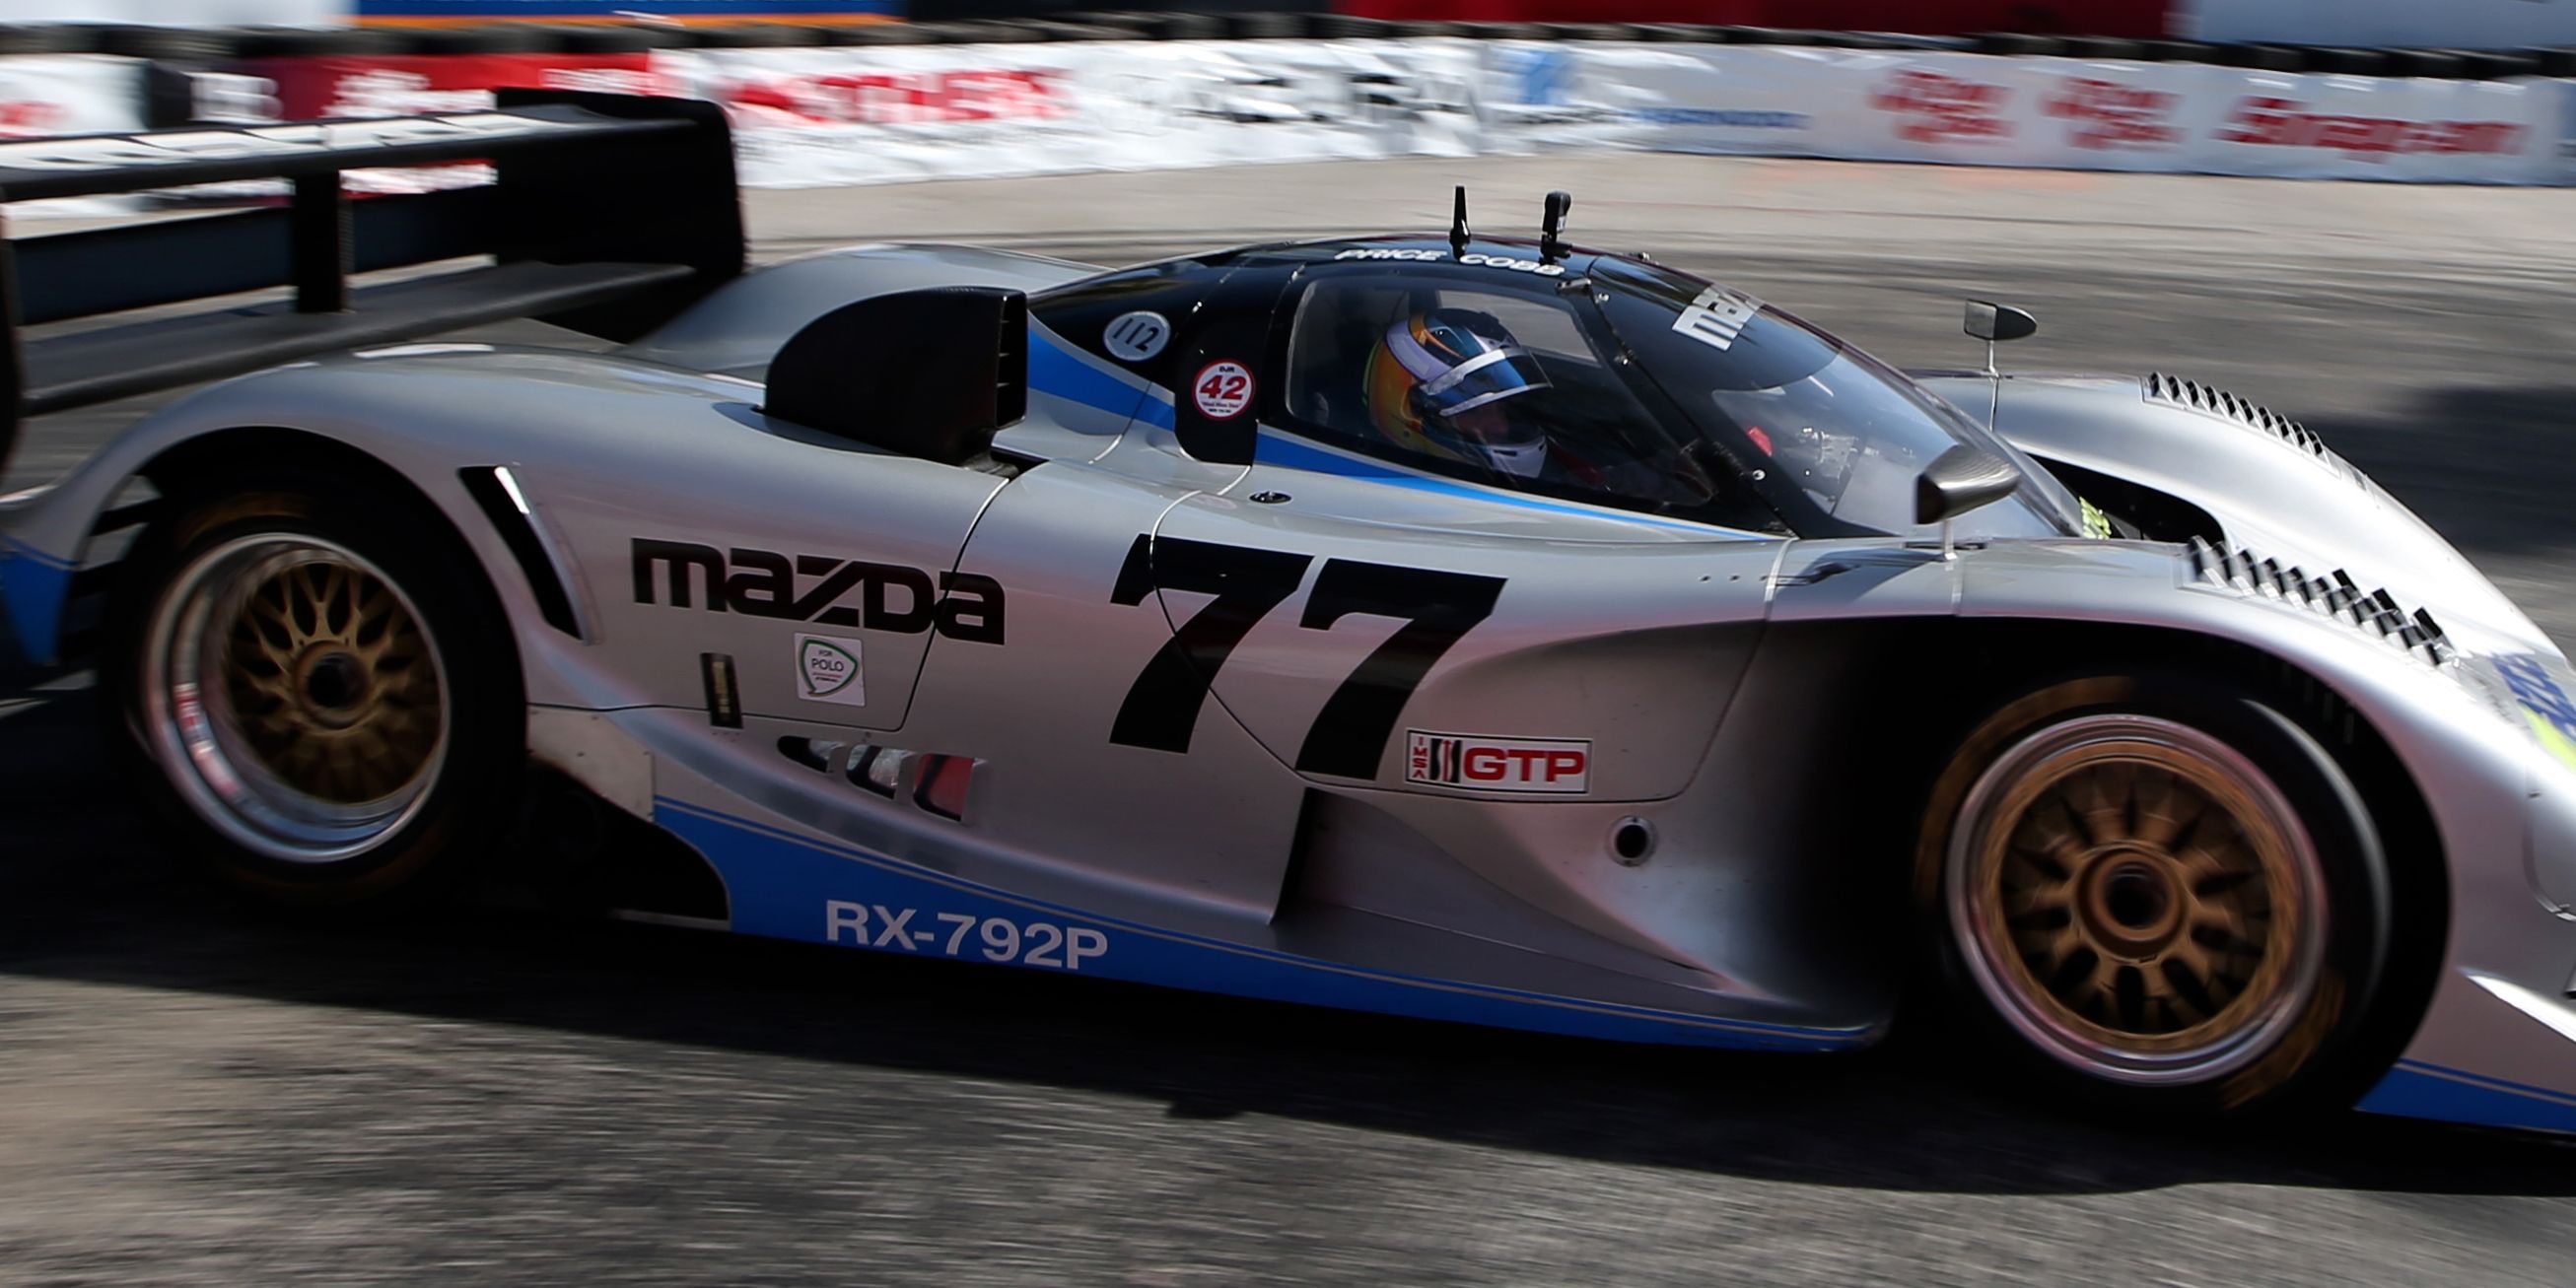 You Haven't Lived Until You've Heard a Mazda Four-Rotor Bounce Off Its Rev Limiter